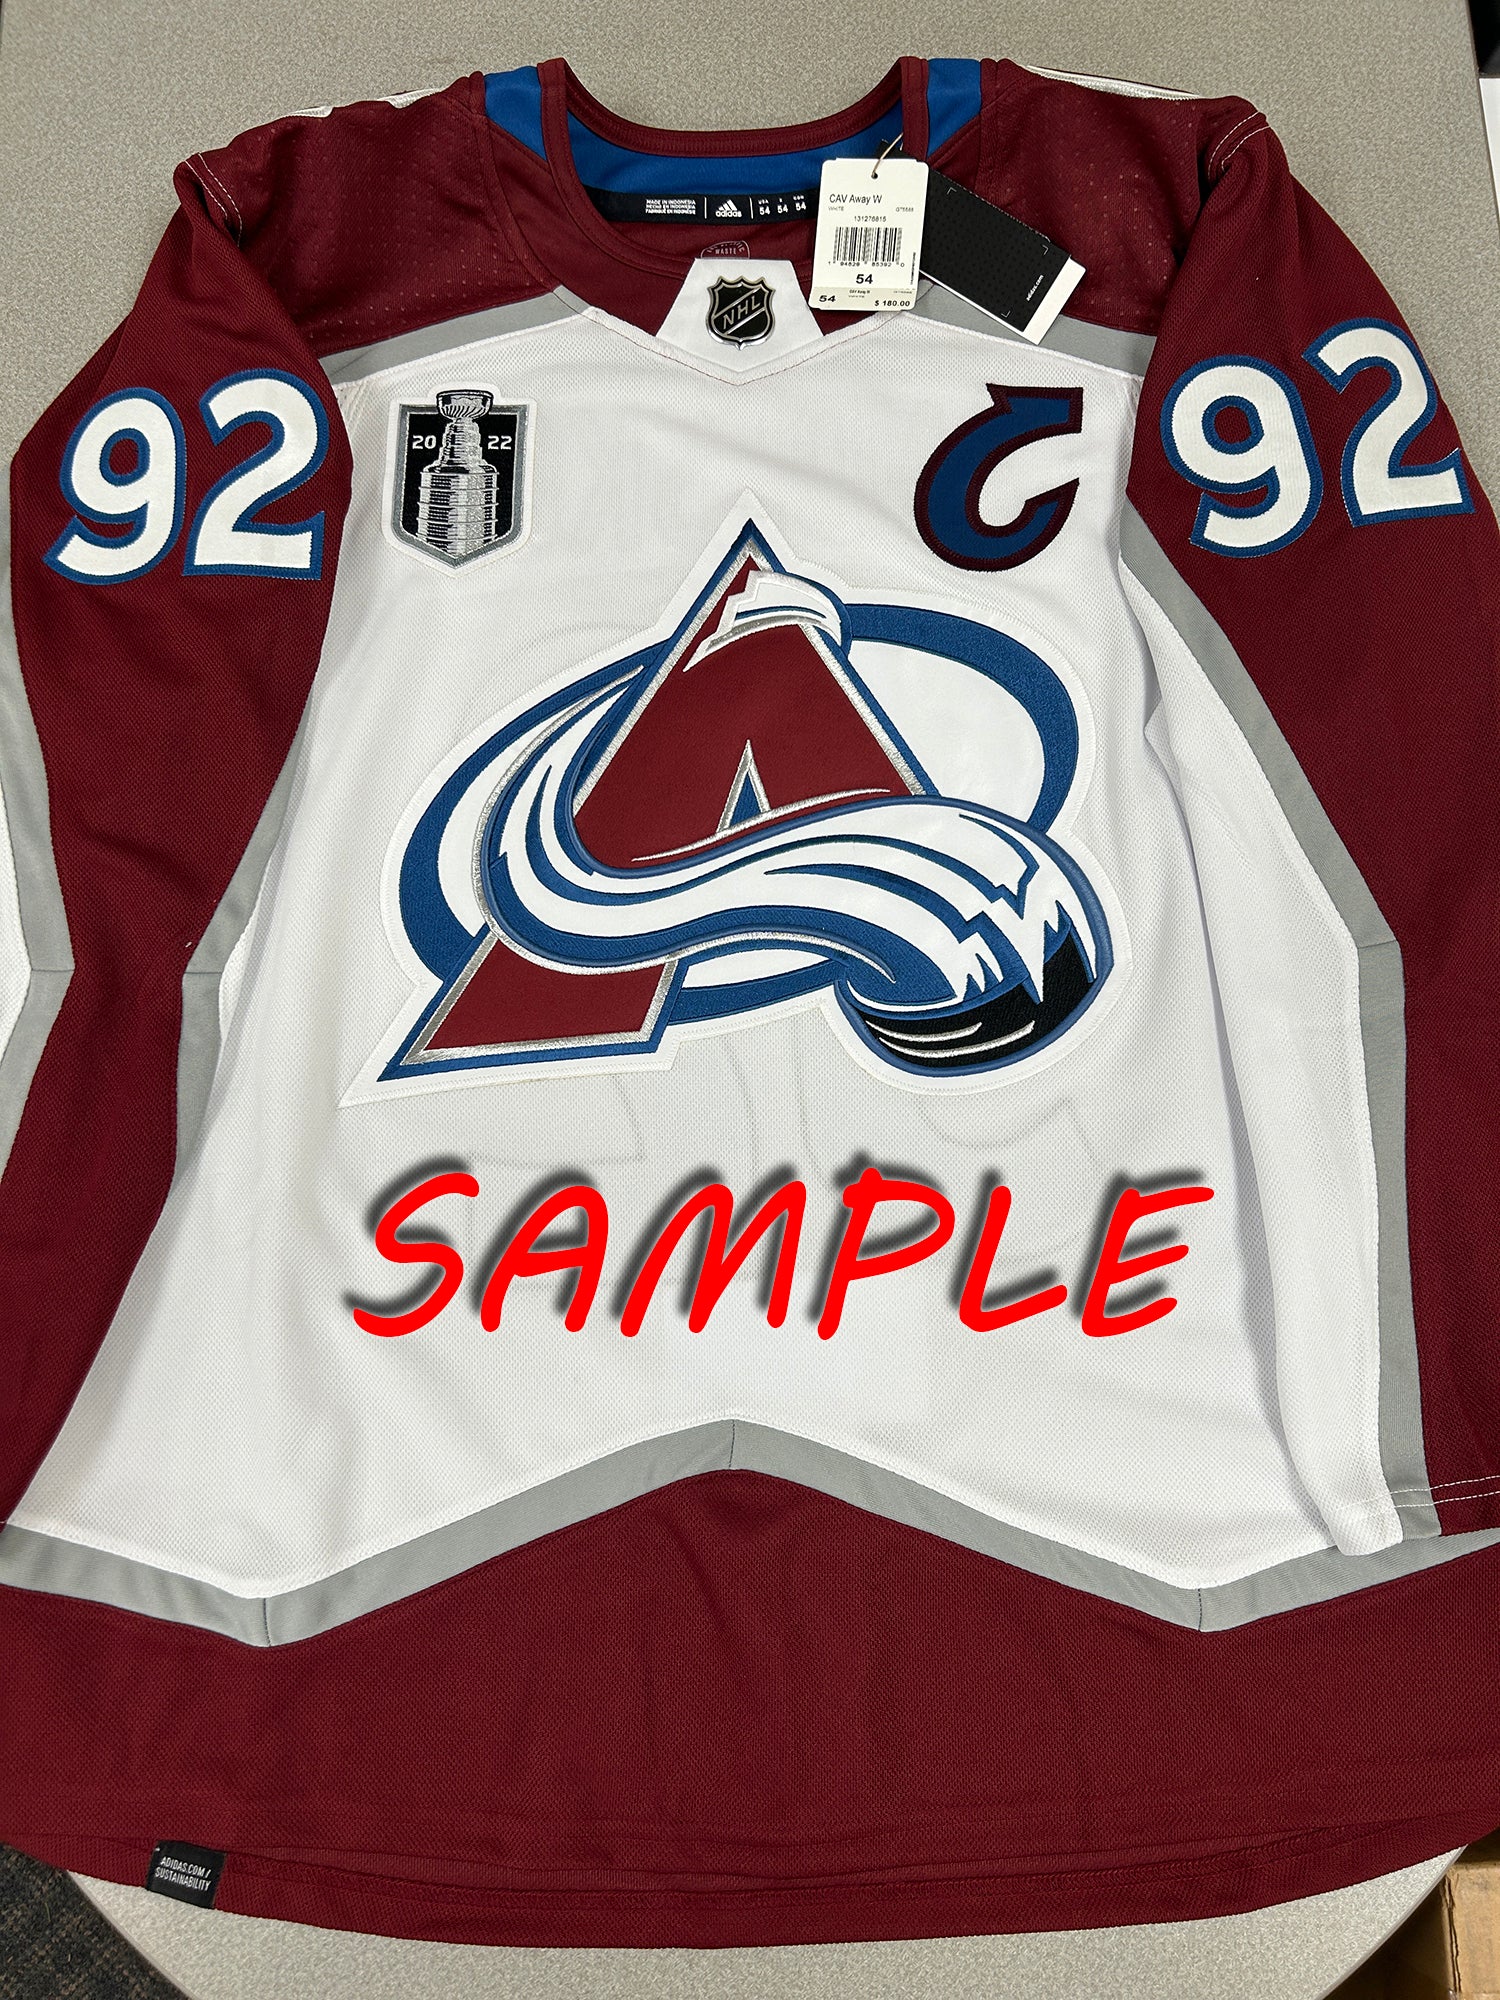 Avalanche Stanley Cup shirts, buy yours now